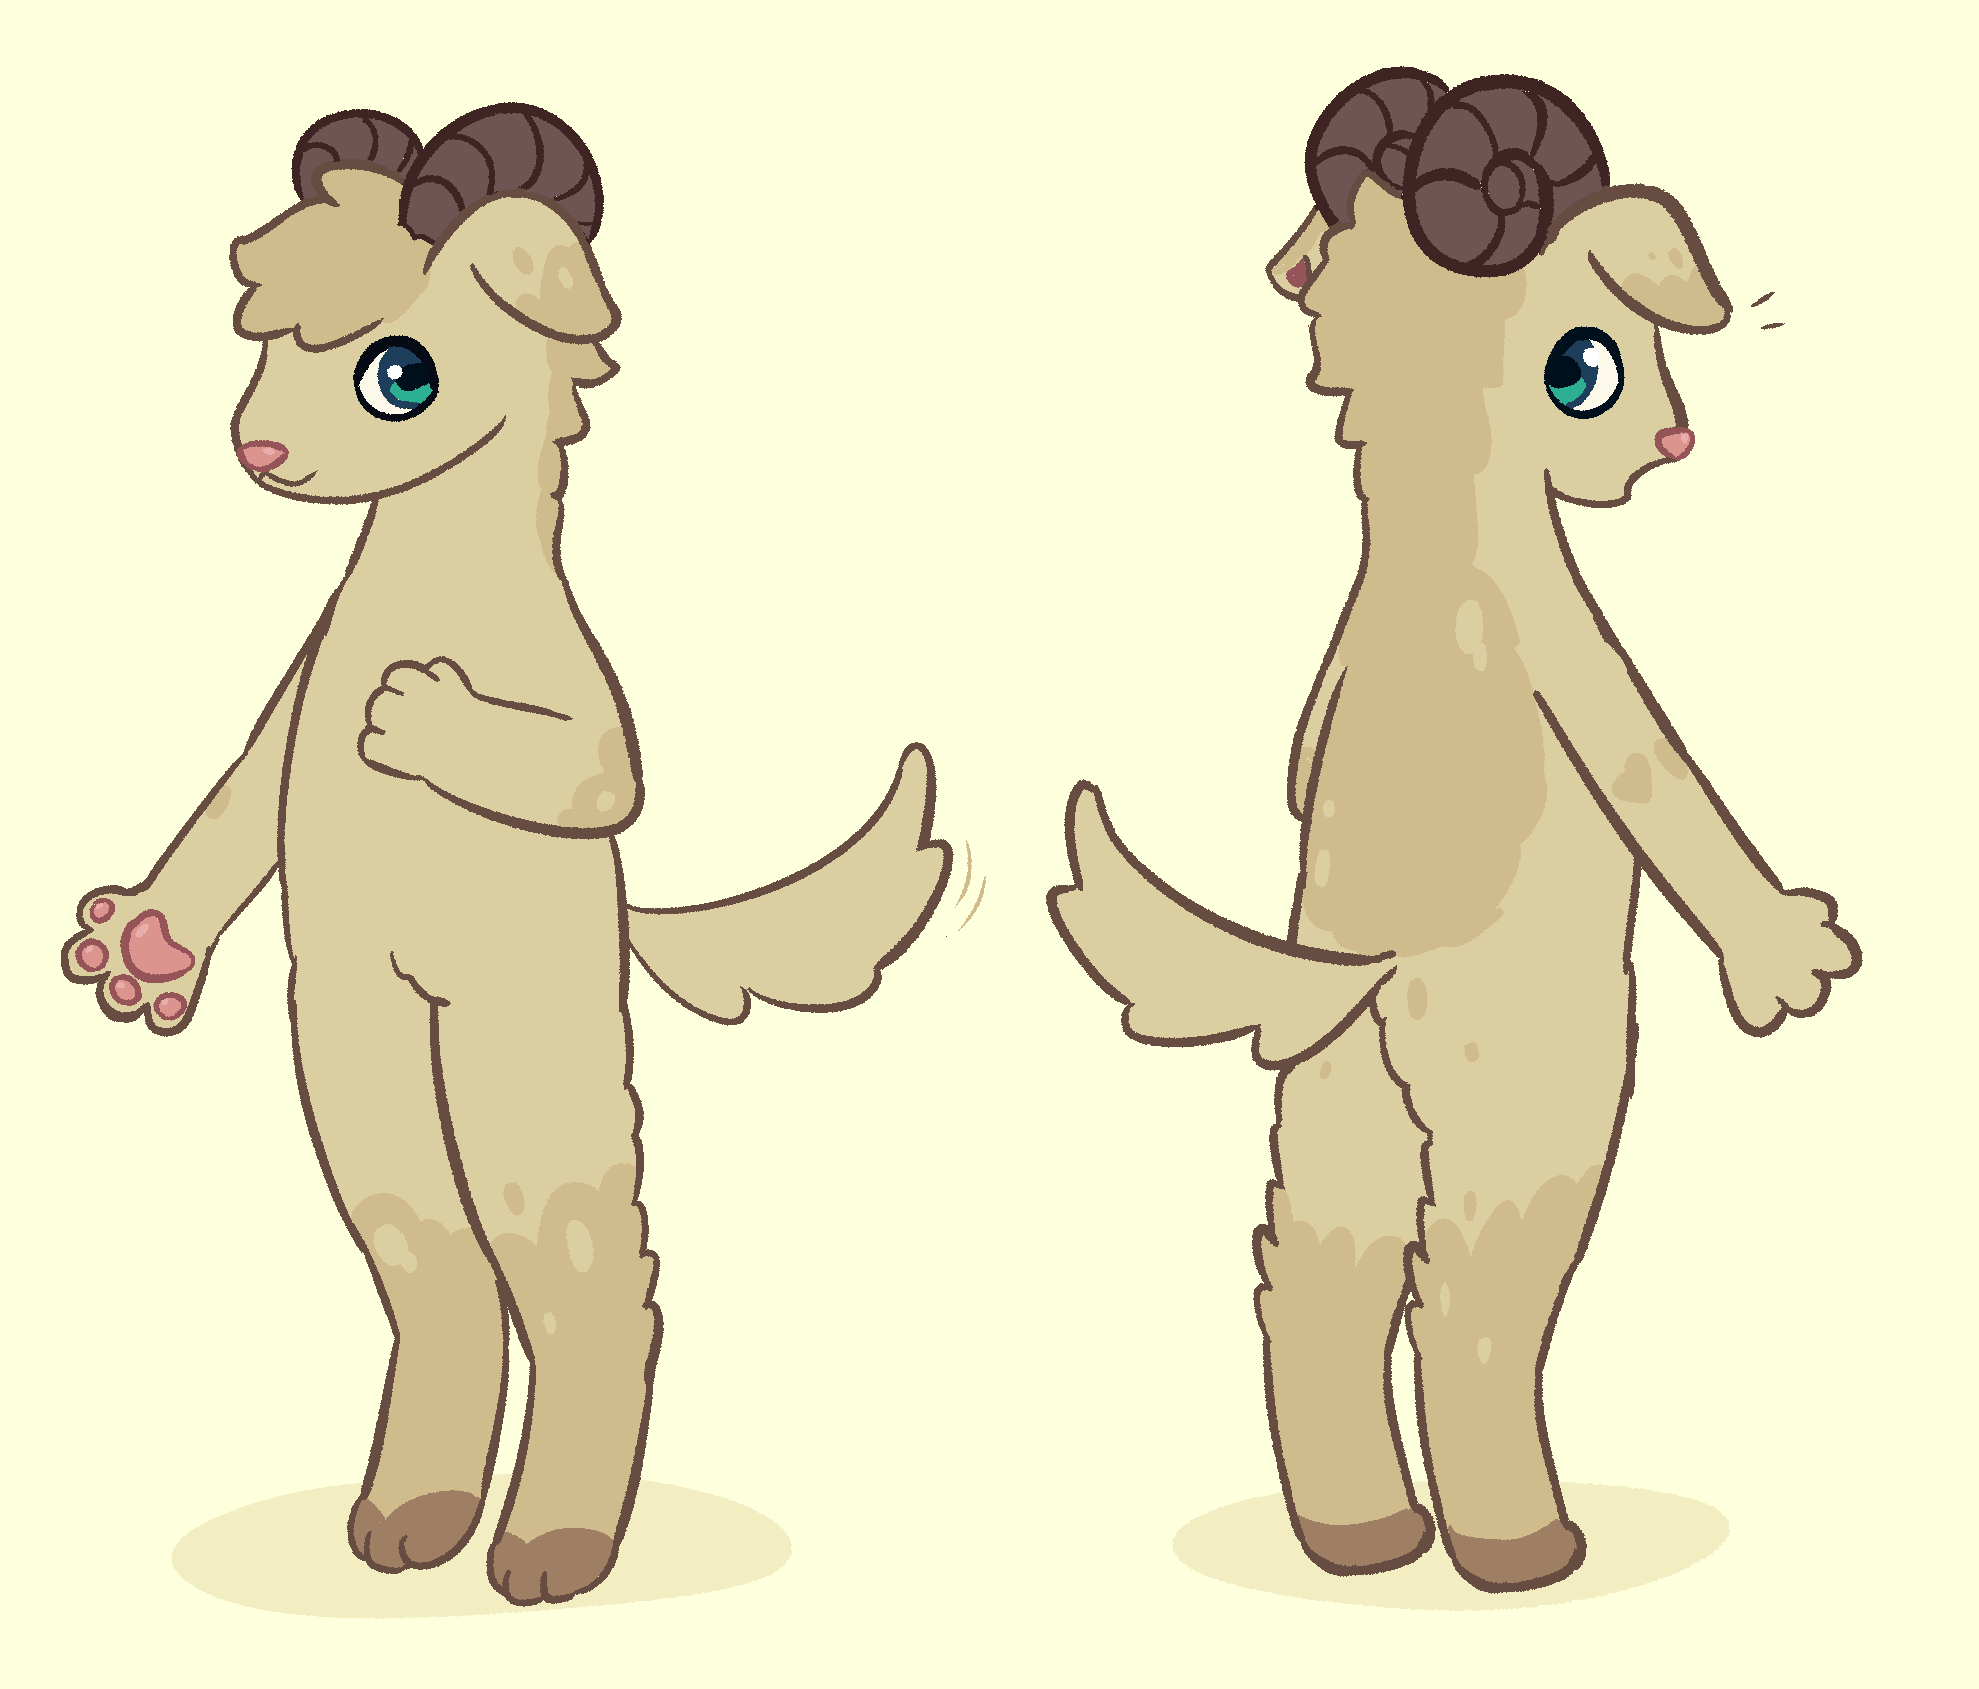 I made a fursona! Their name is Fennel and they're a dog/sheep mix